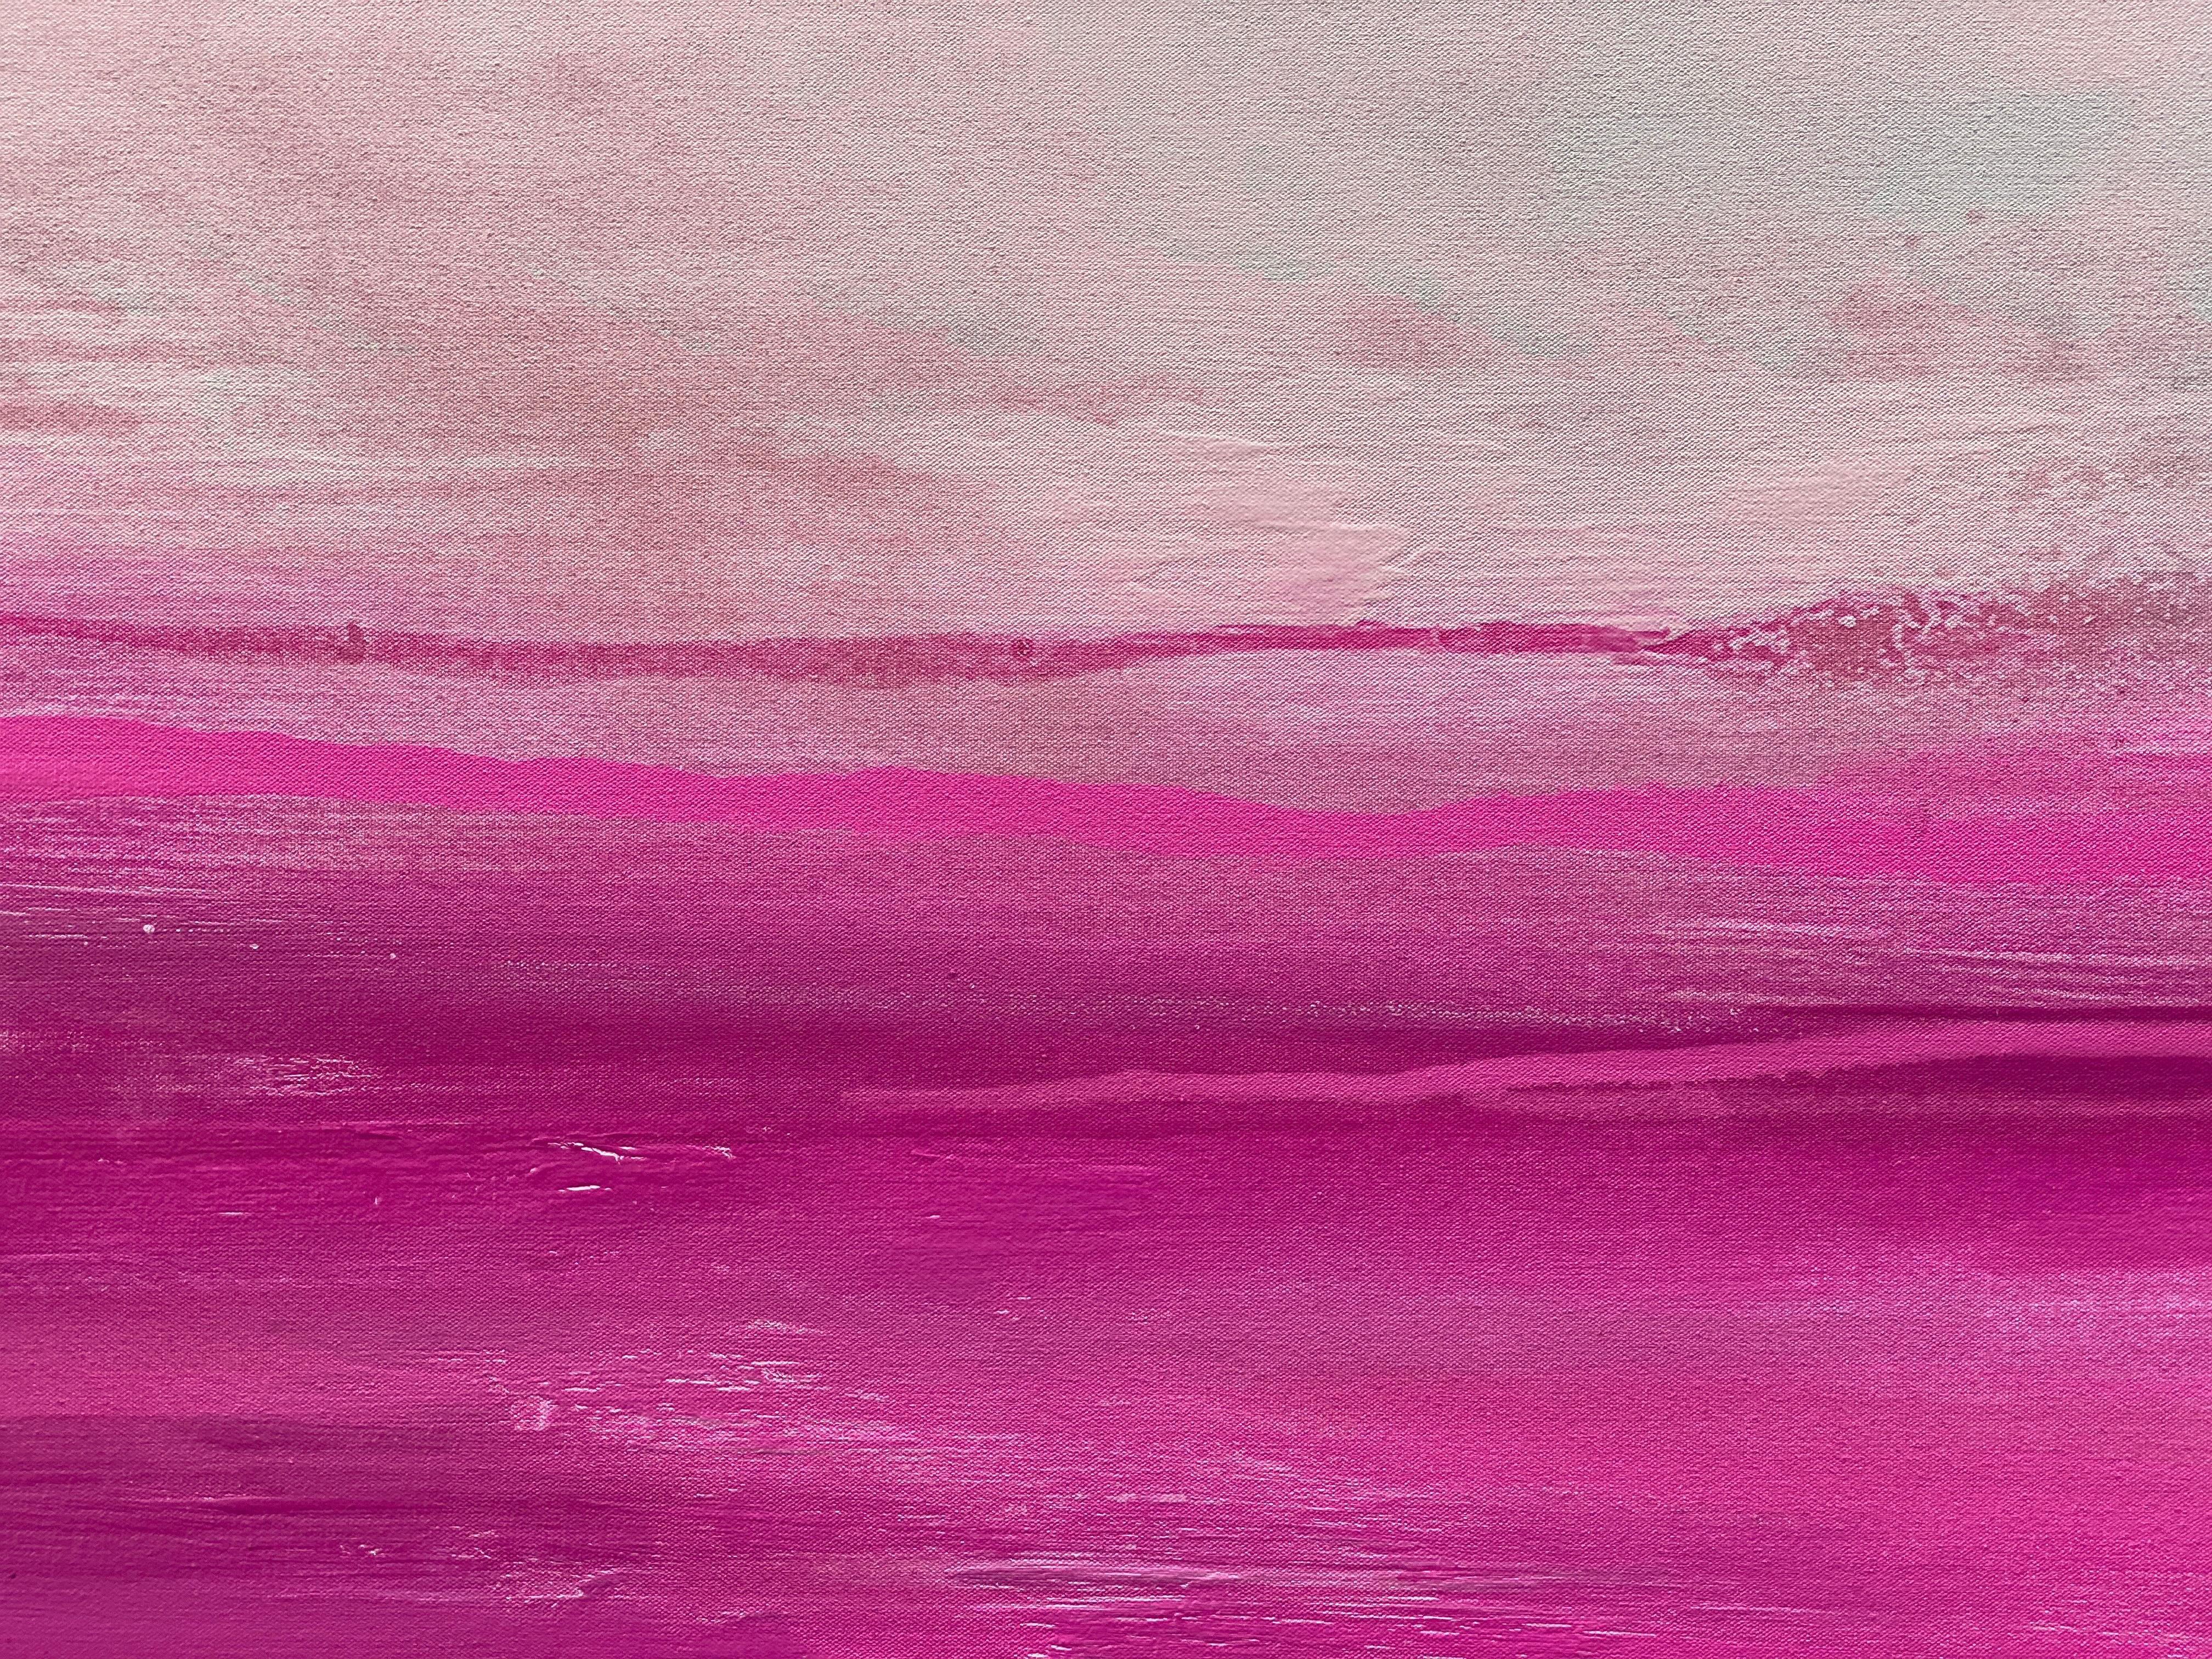 Emanating light, energy and movement, this is large dynamic minimalist abstract is painted in colours of pastel pink, vibrant pink, magenta, mist and white. Layered paint reveal descriptive textures, delicate details, thick rough textures in areas